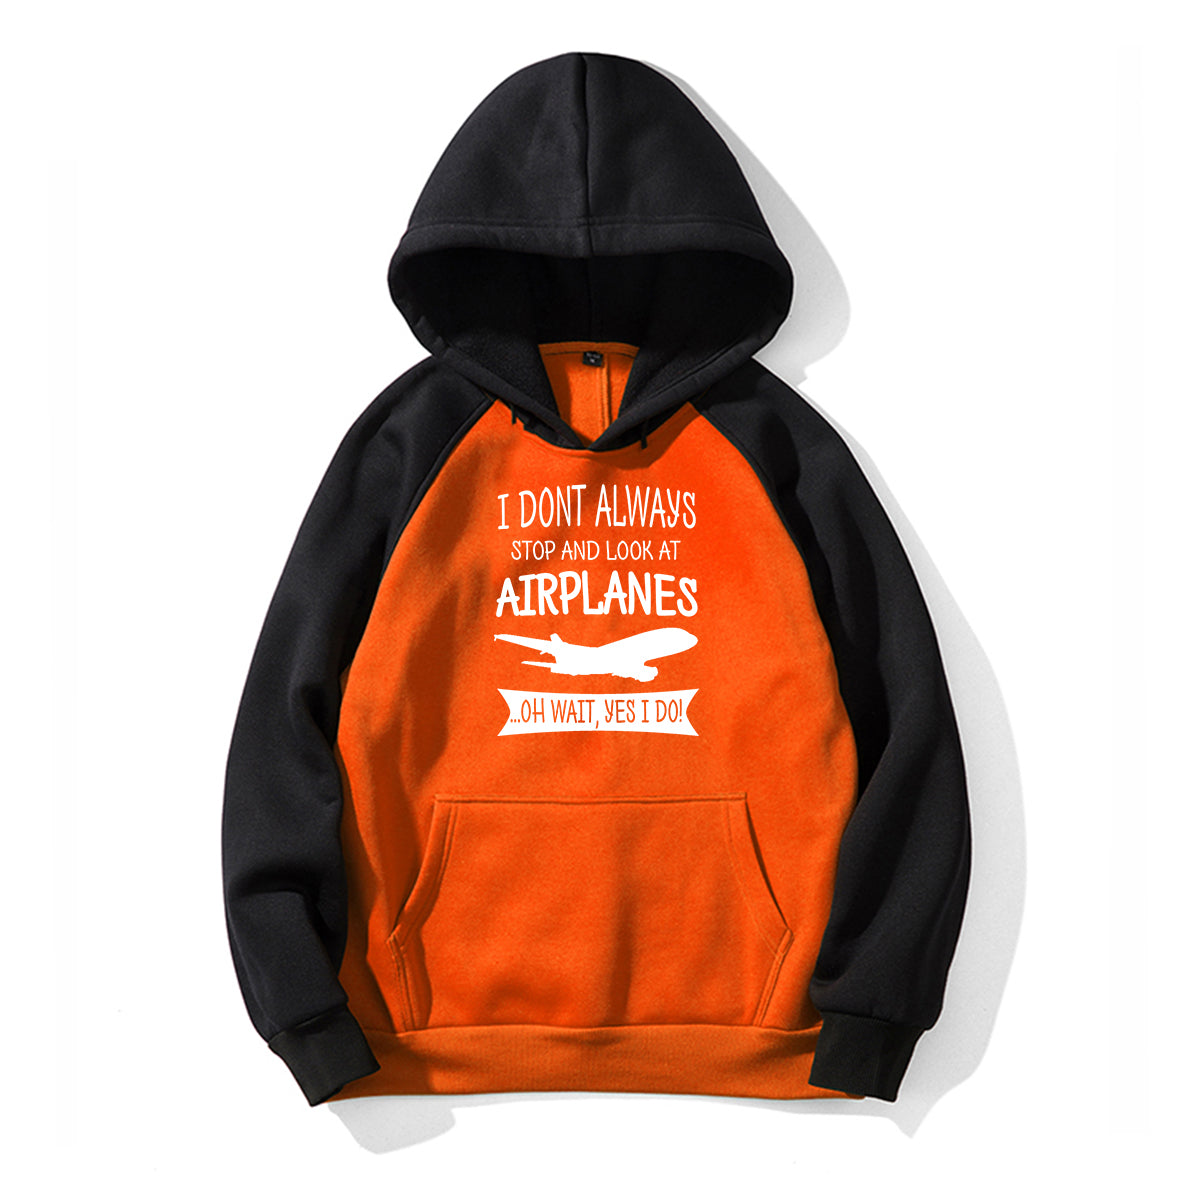 I Don't Always Stop and Look at Airplanes Designed Colourful Hoodies